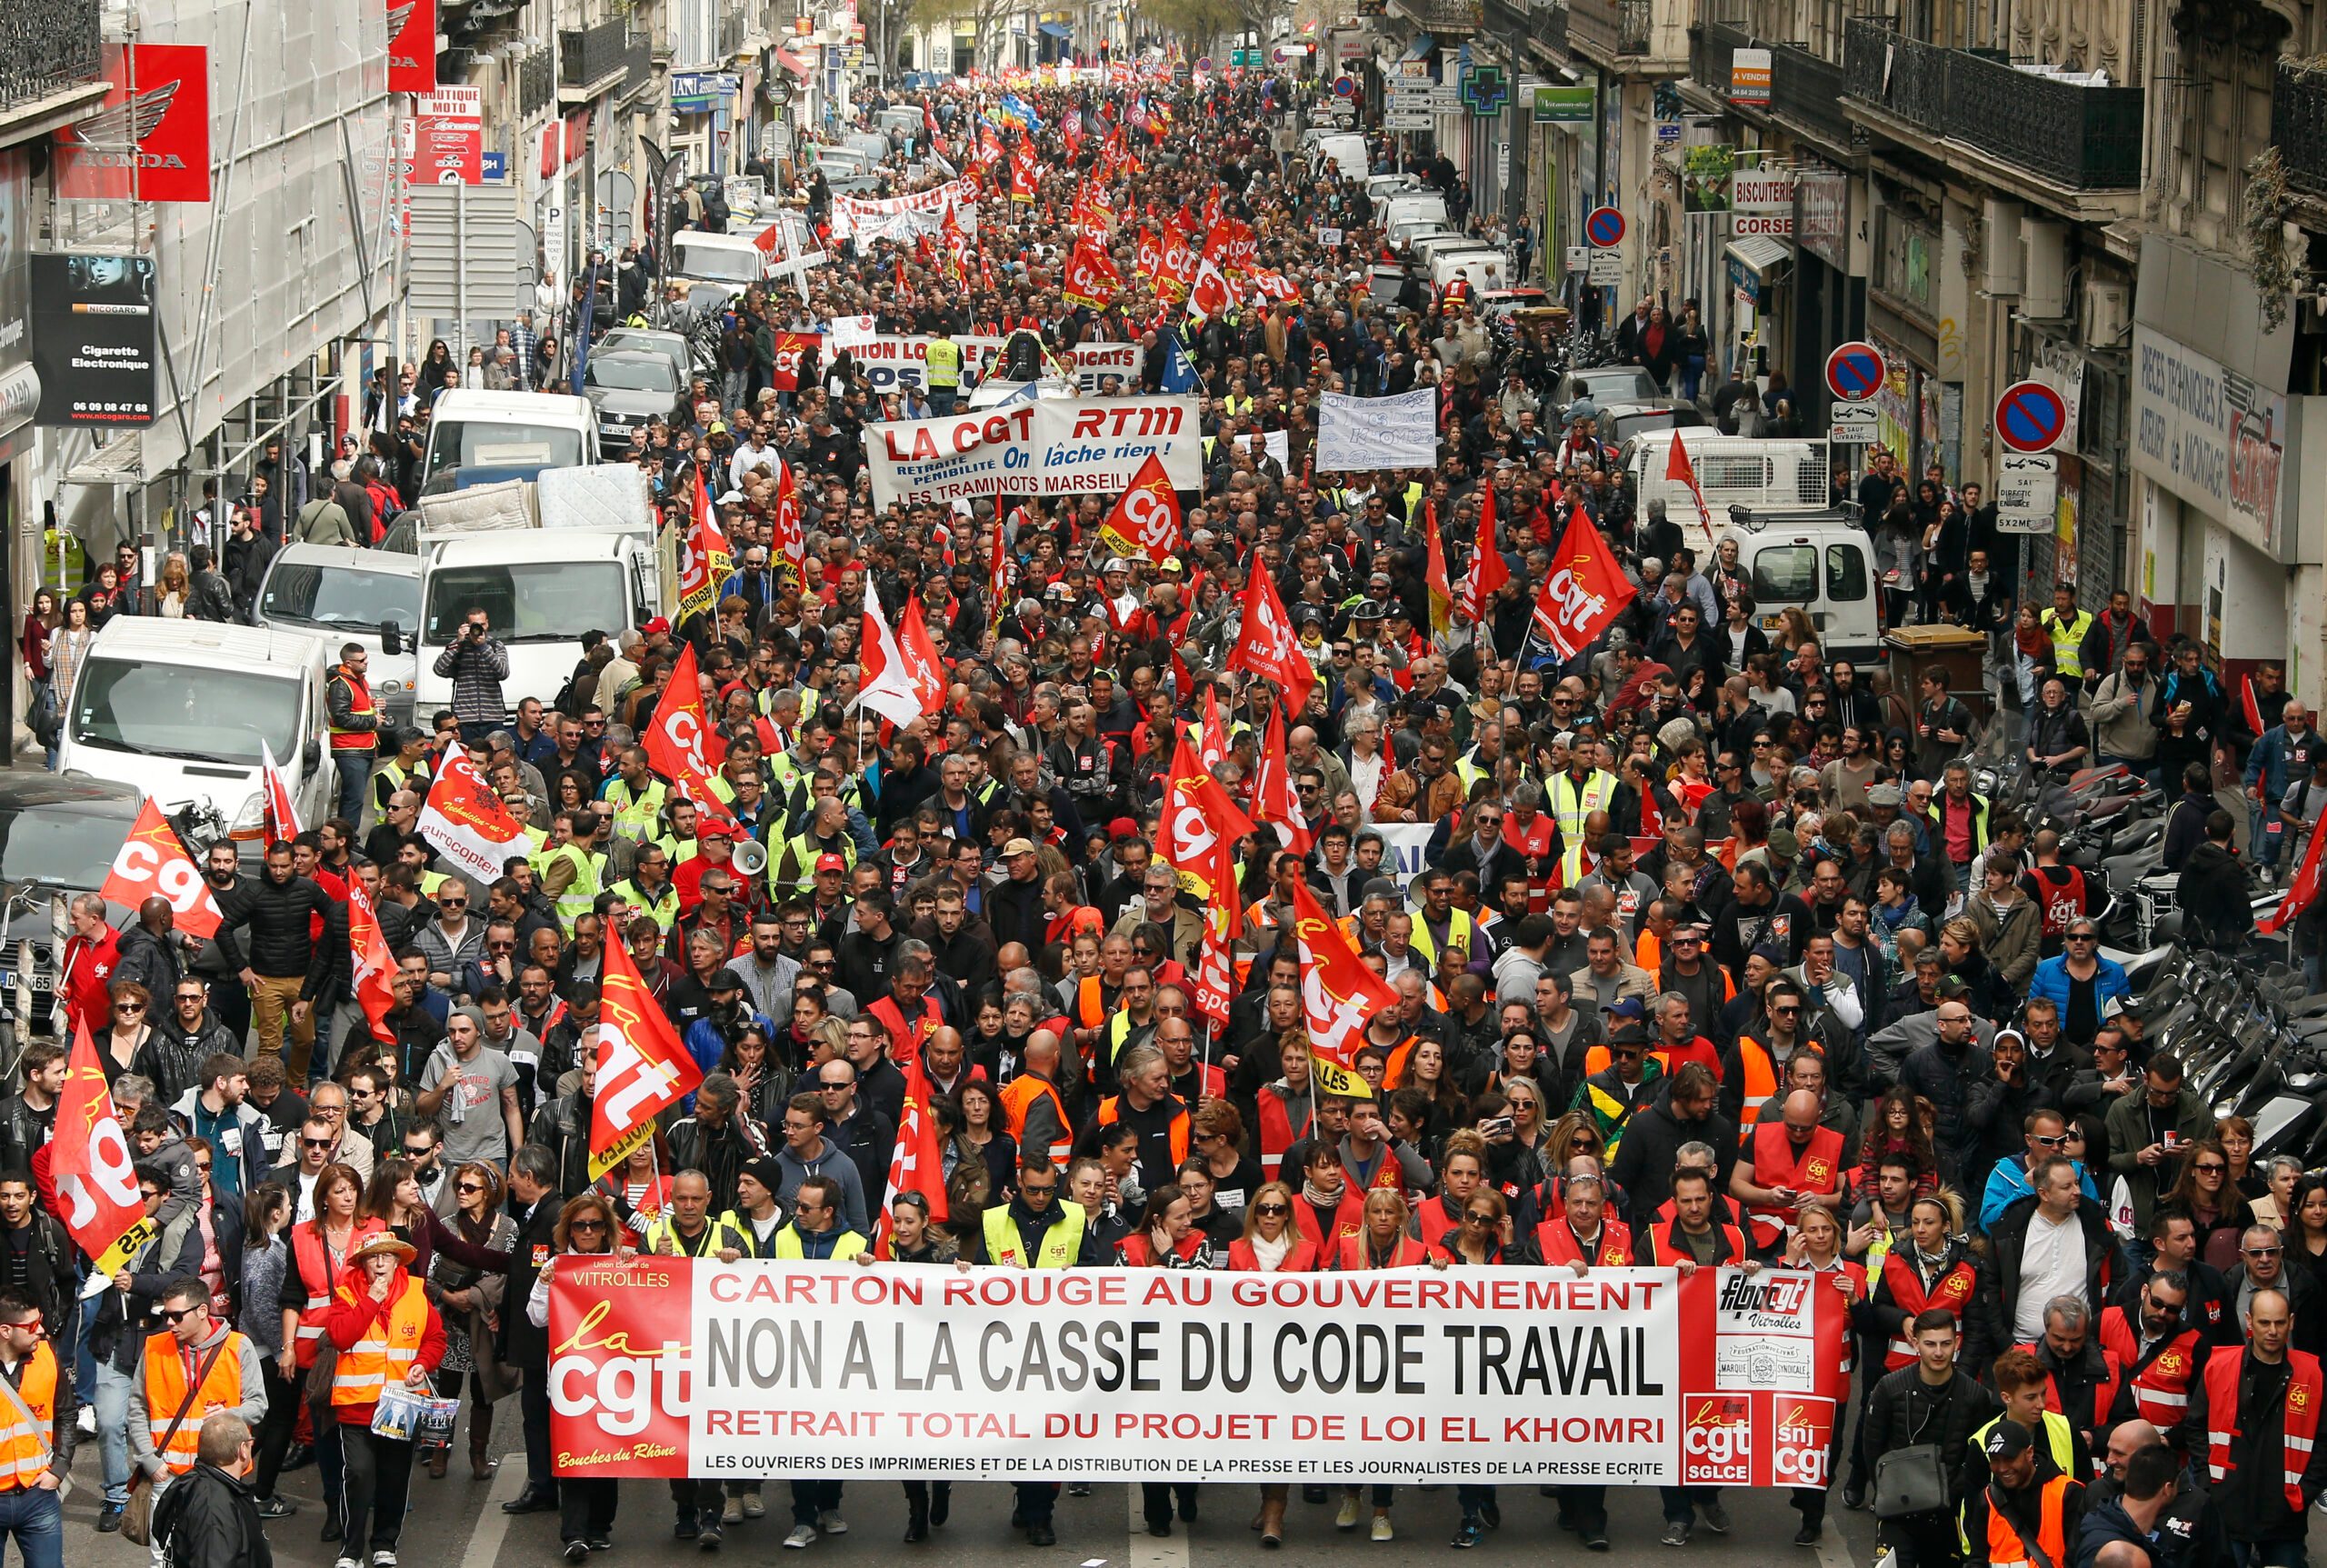 French protesters clash with police over labor reforms